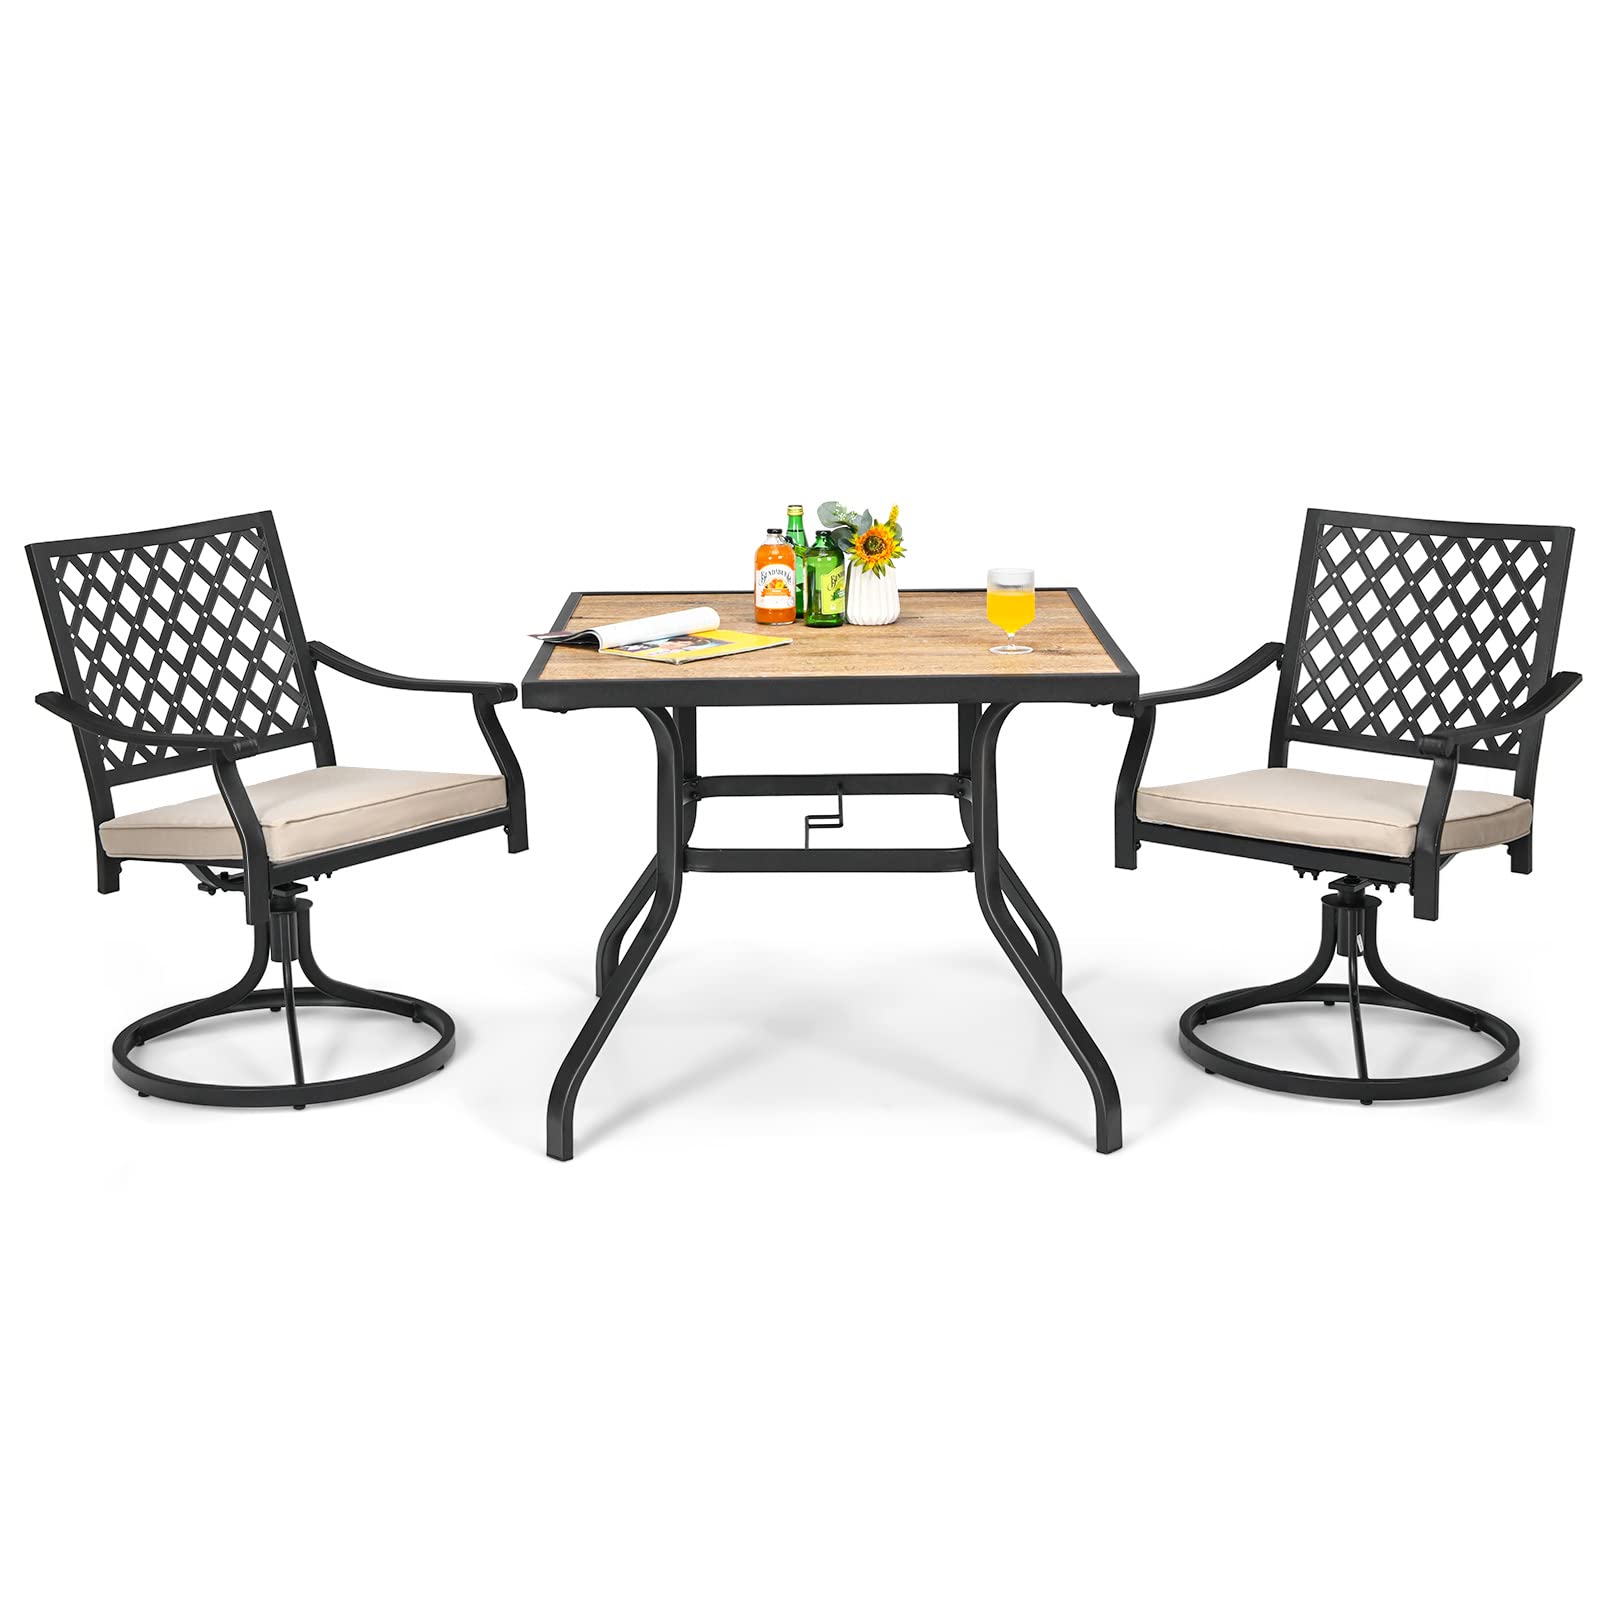 Giantex 3 Piece Patio Dining Set, Outdoor Square Bistro Table for 2, Swivel Rocking Chair with Soft Cushion